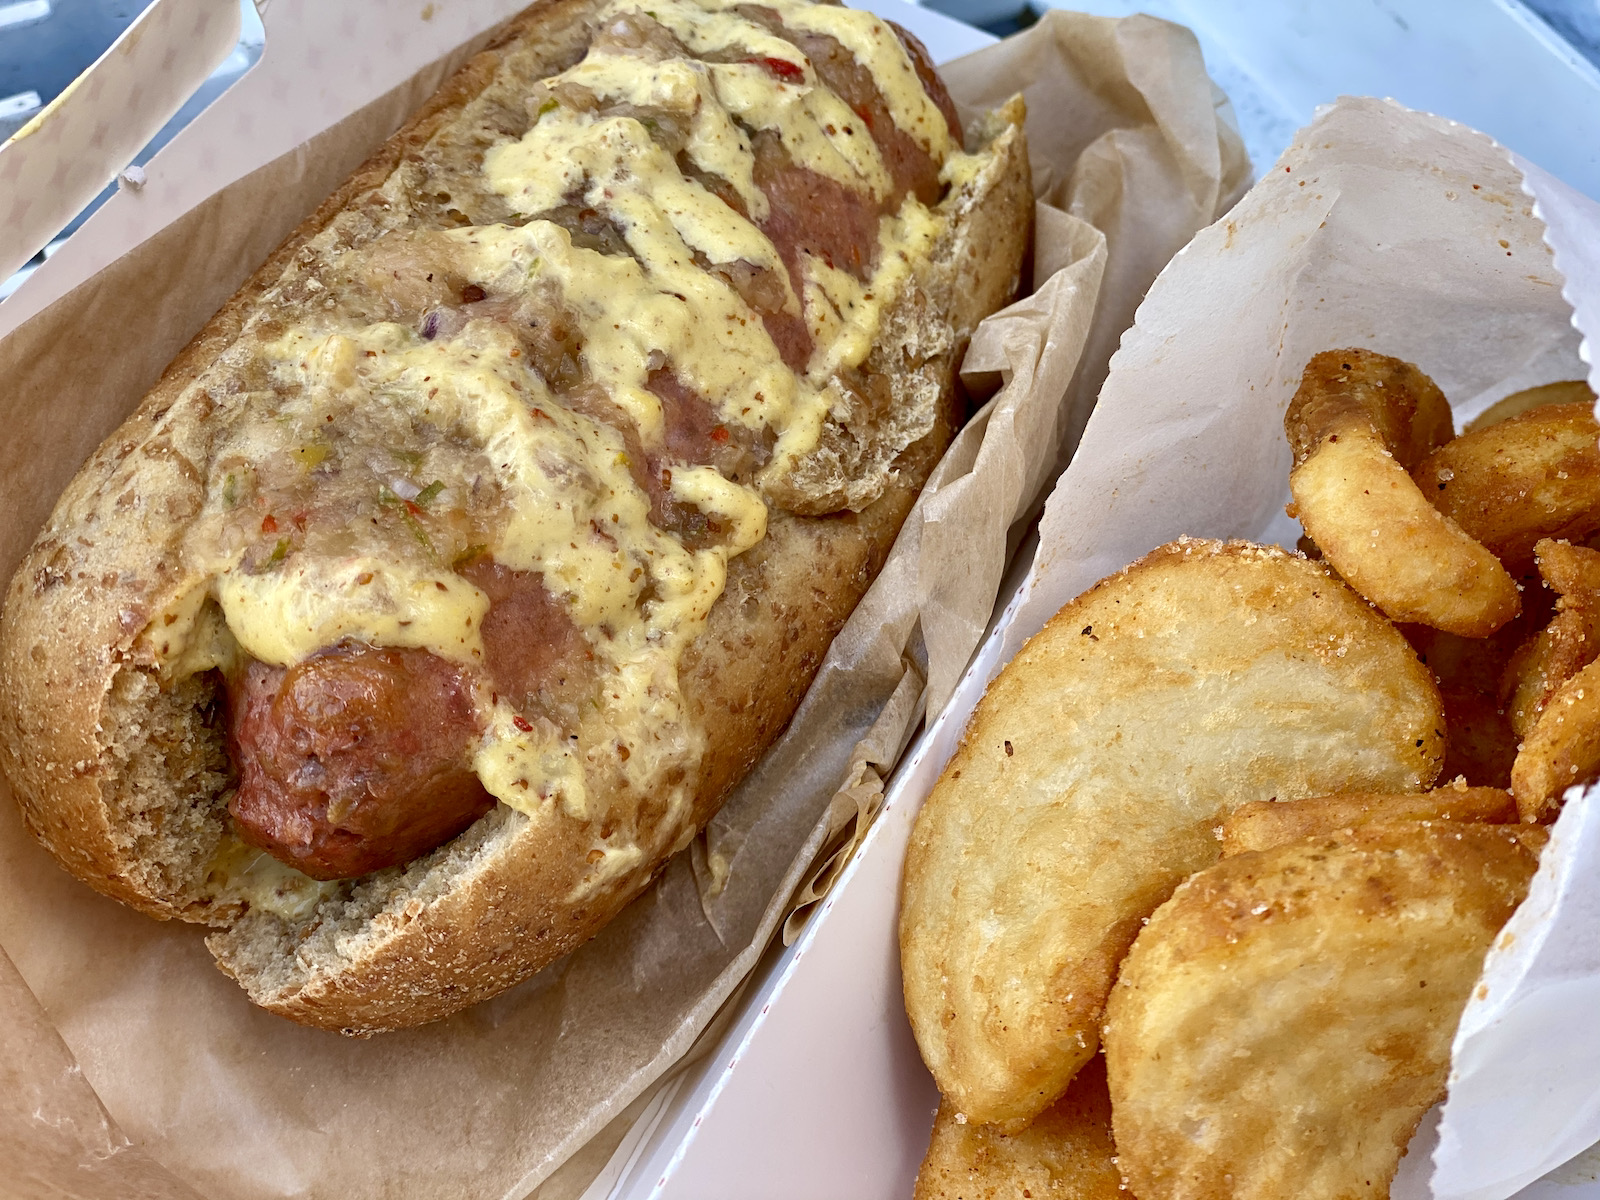 The Pineapple Express at Riley's Good Dogs